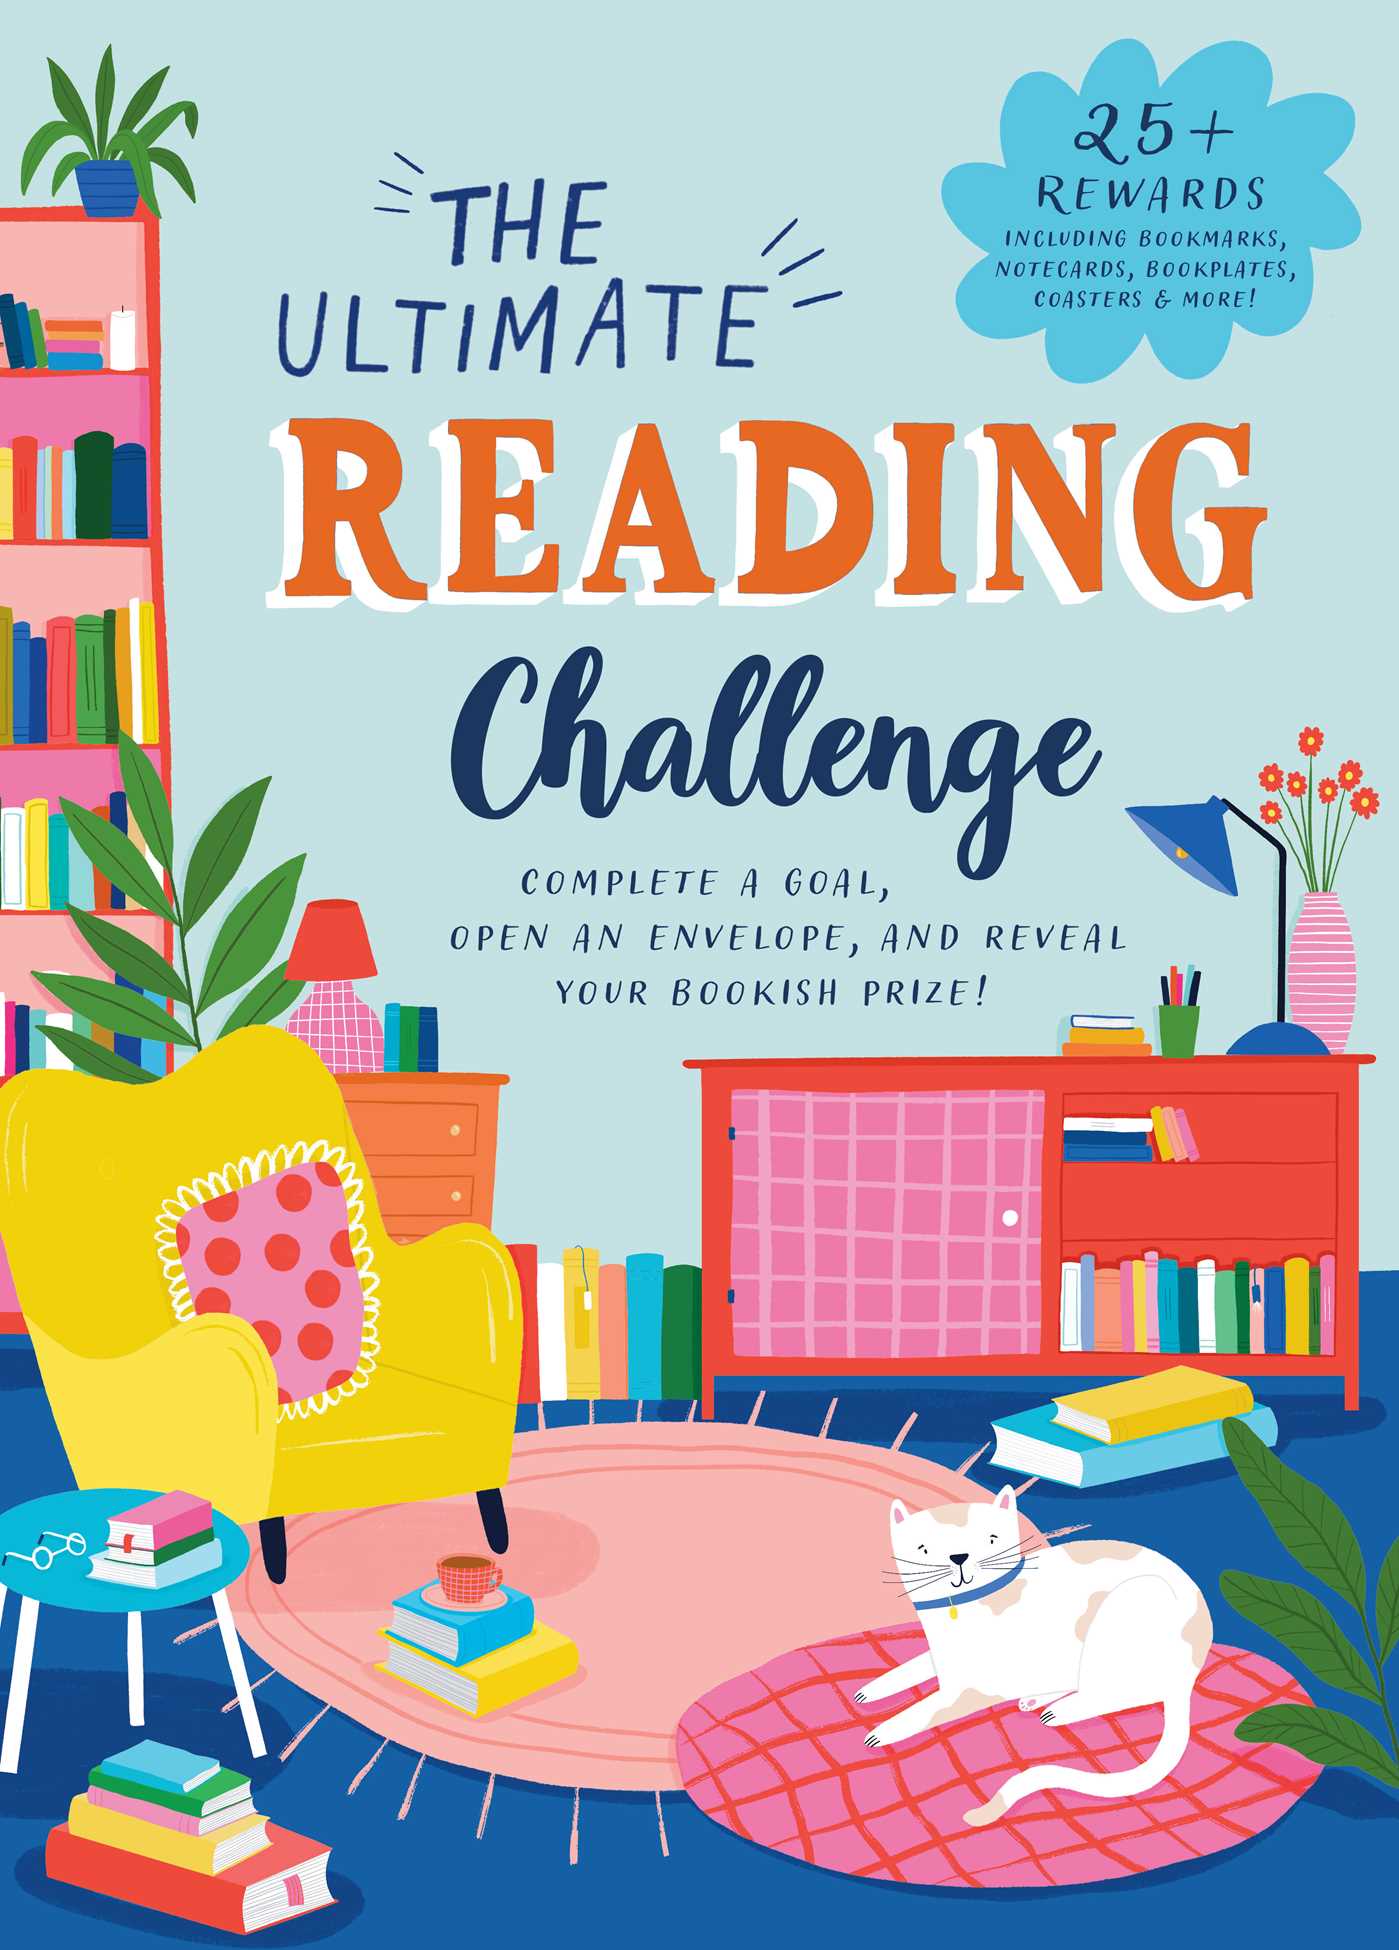 The Ultimate Reading Challenge : Complete a Goal, Open an Envelope, and Reveal Your Bookish Prize! | Weldon Owen